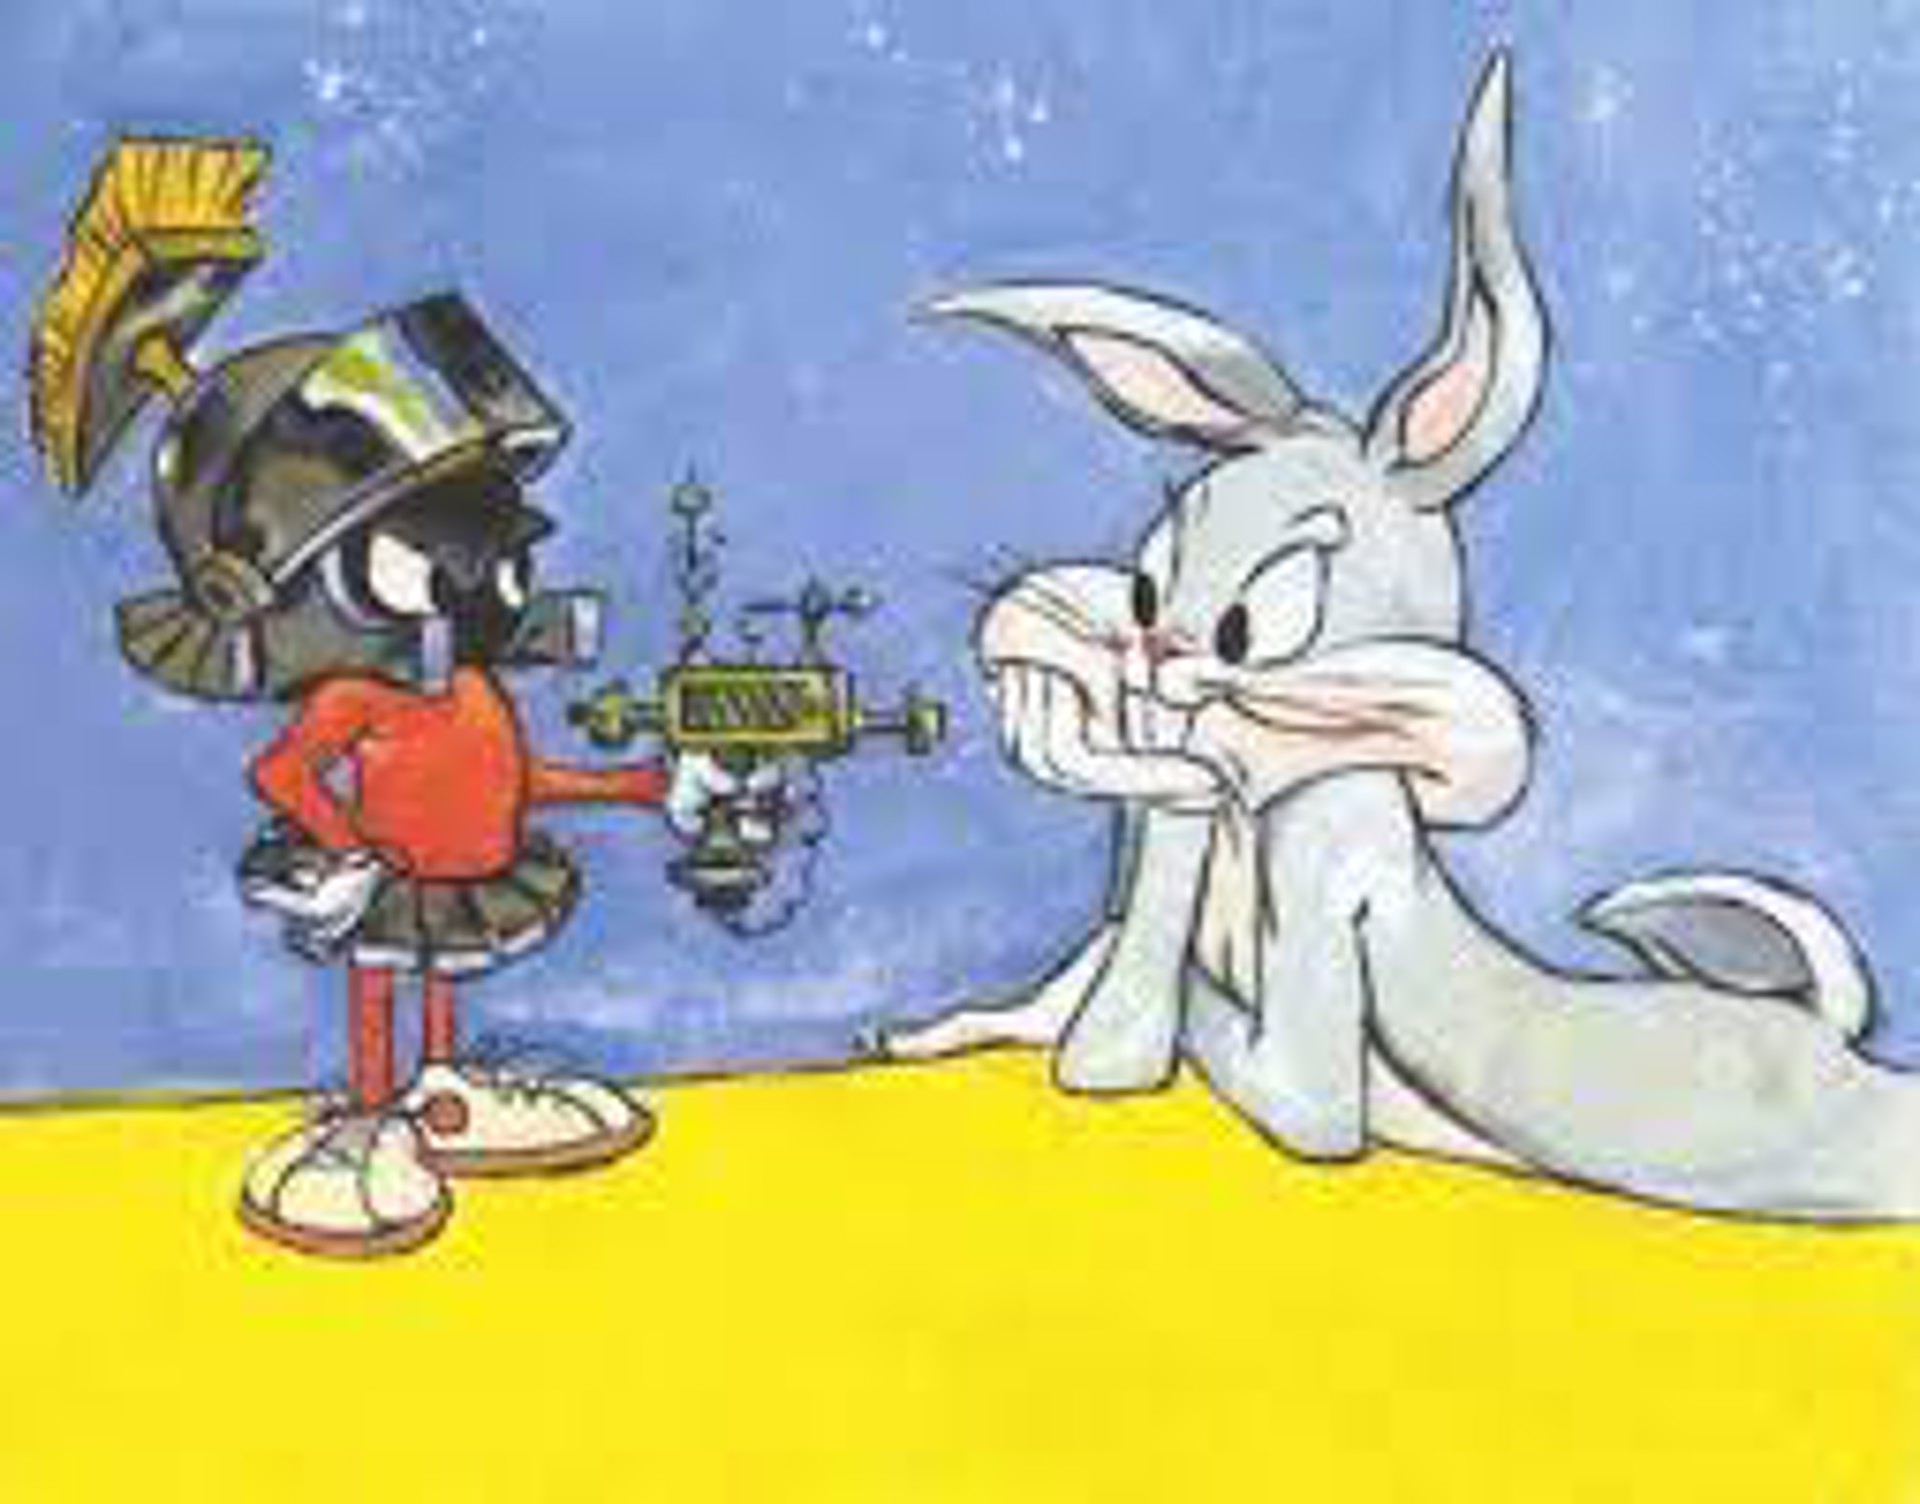 Invasion of the Bunny Snatchers by Chuck Jones